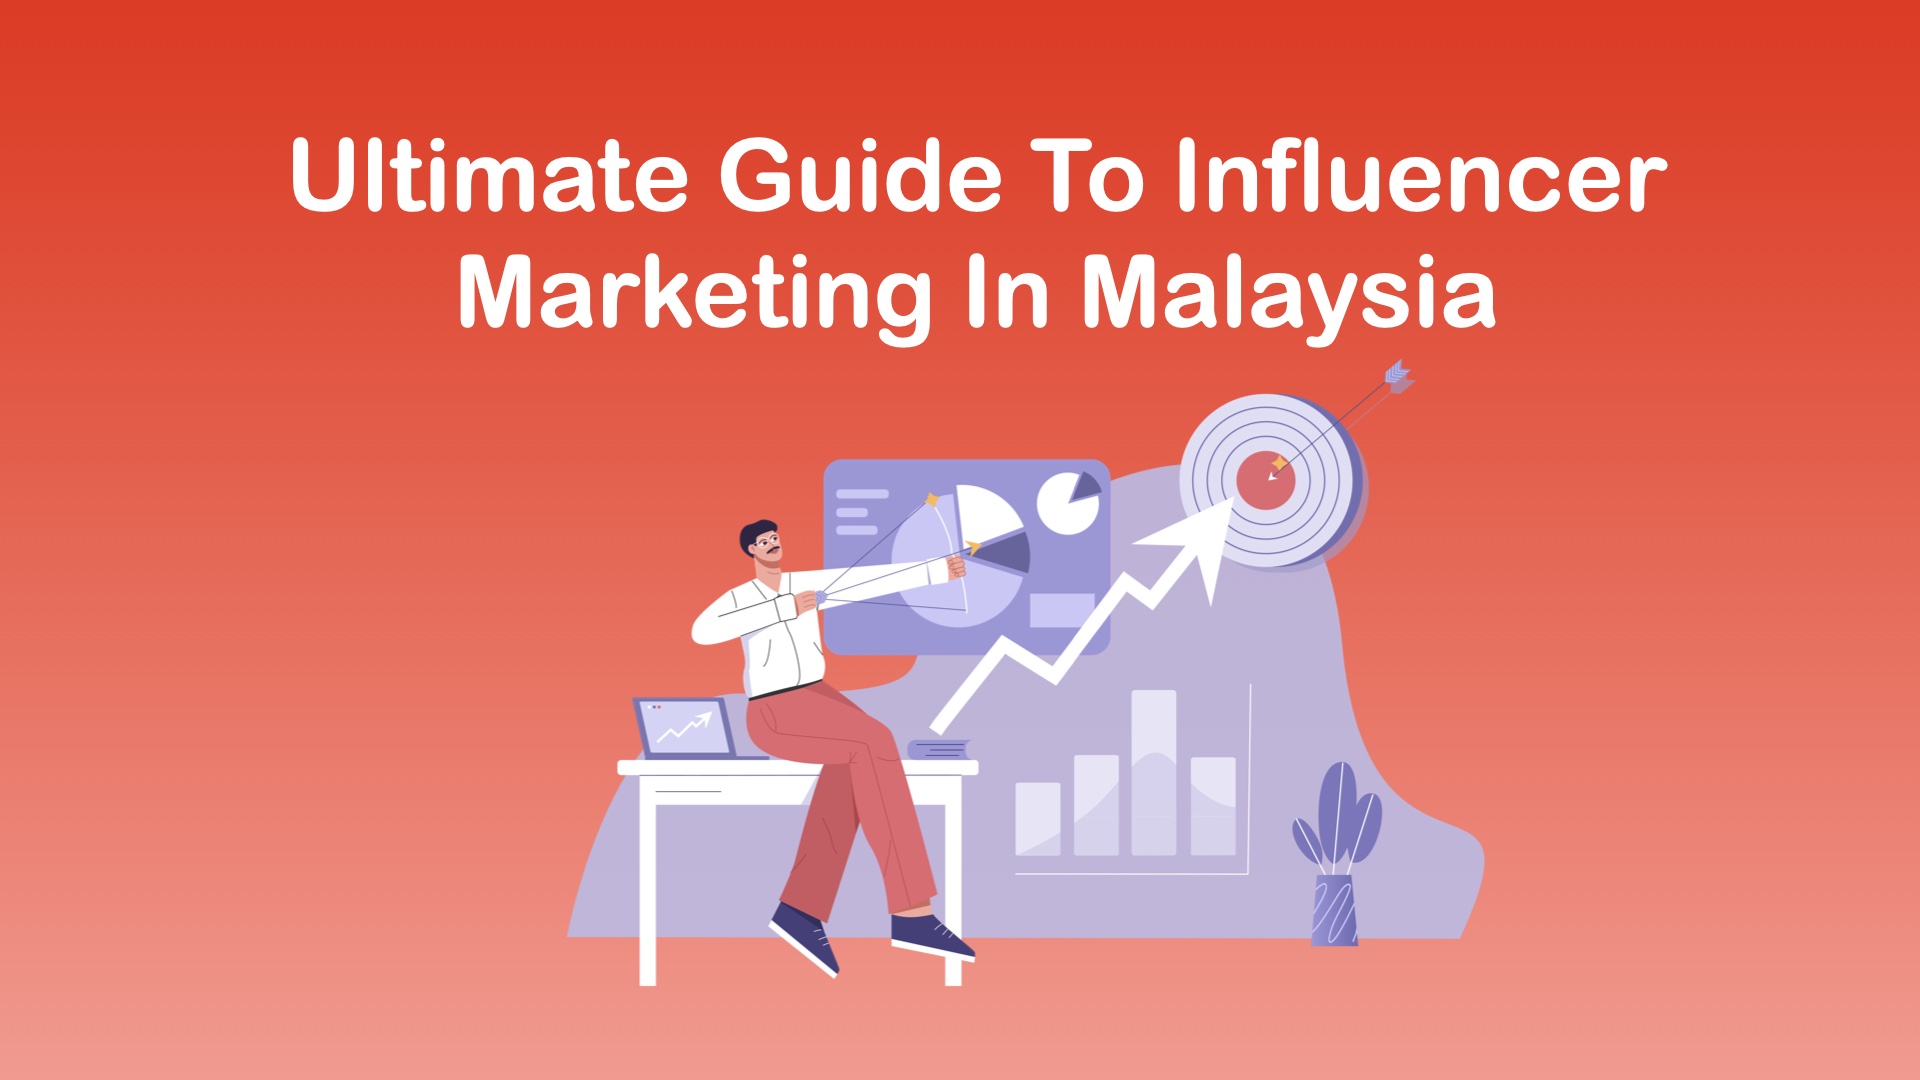 Ultimate Guide To Influencer Marketing In Malaysia